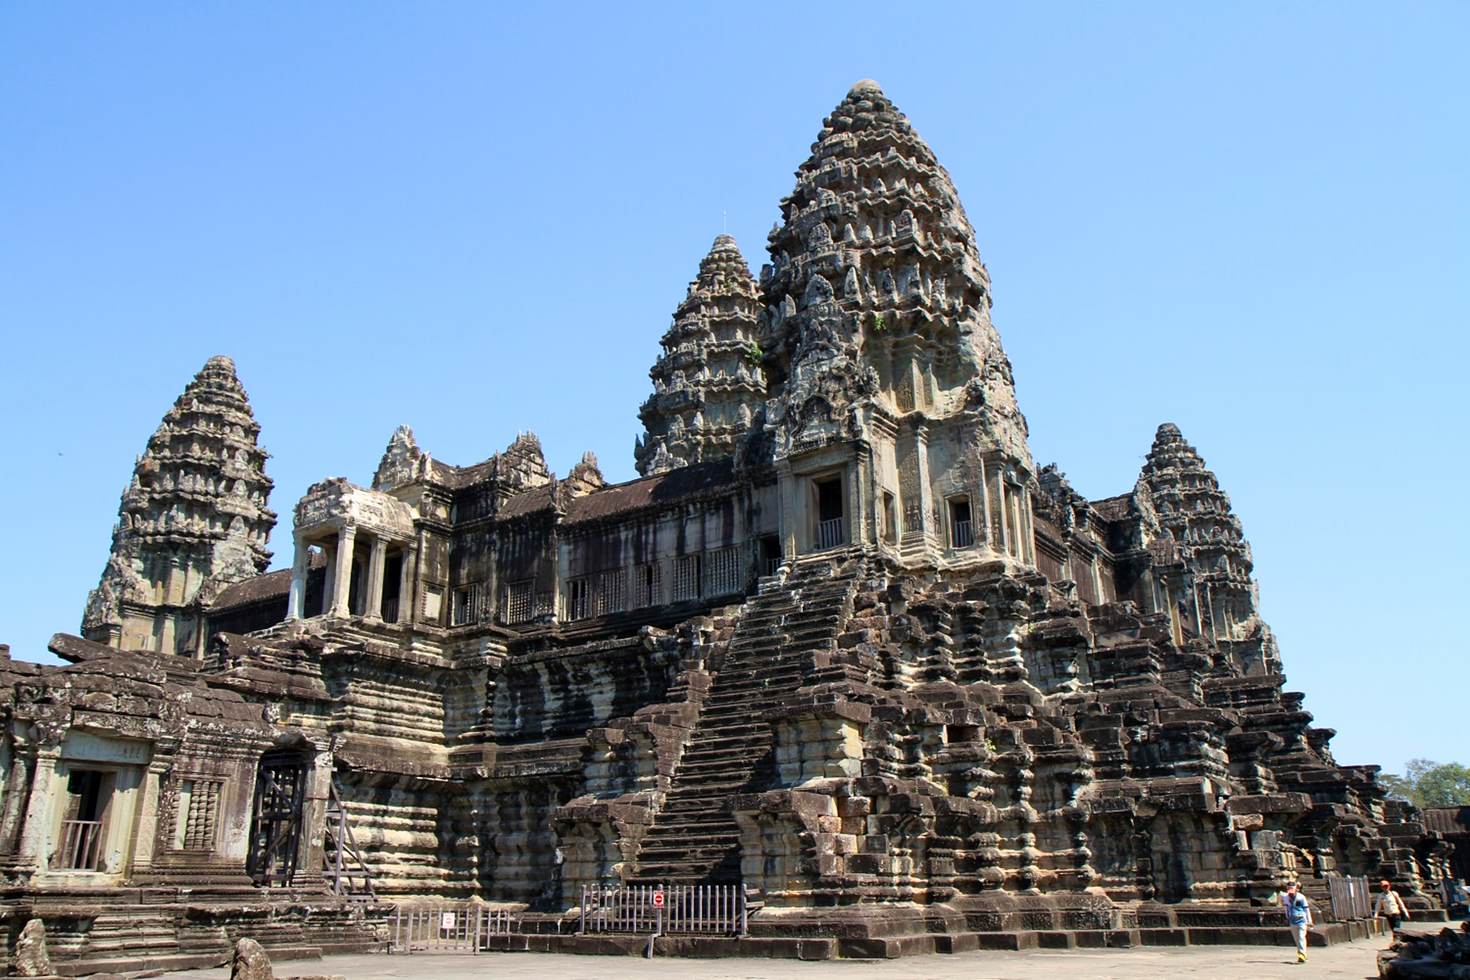 one of the towers of Angkor Wat, Cambodia